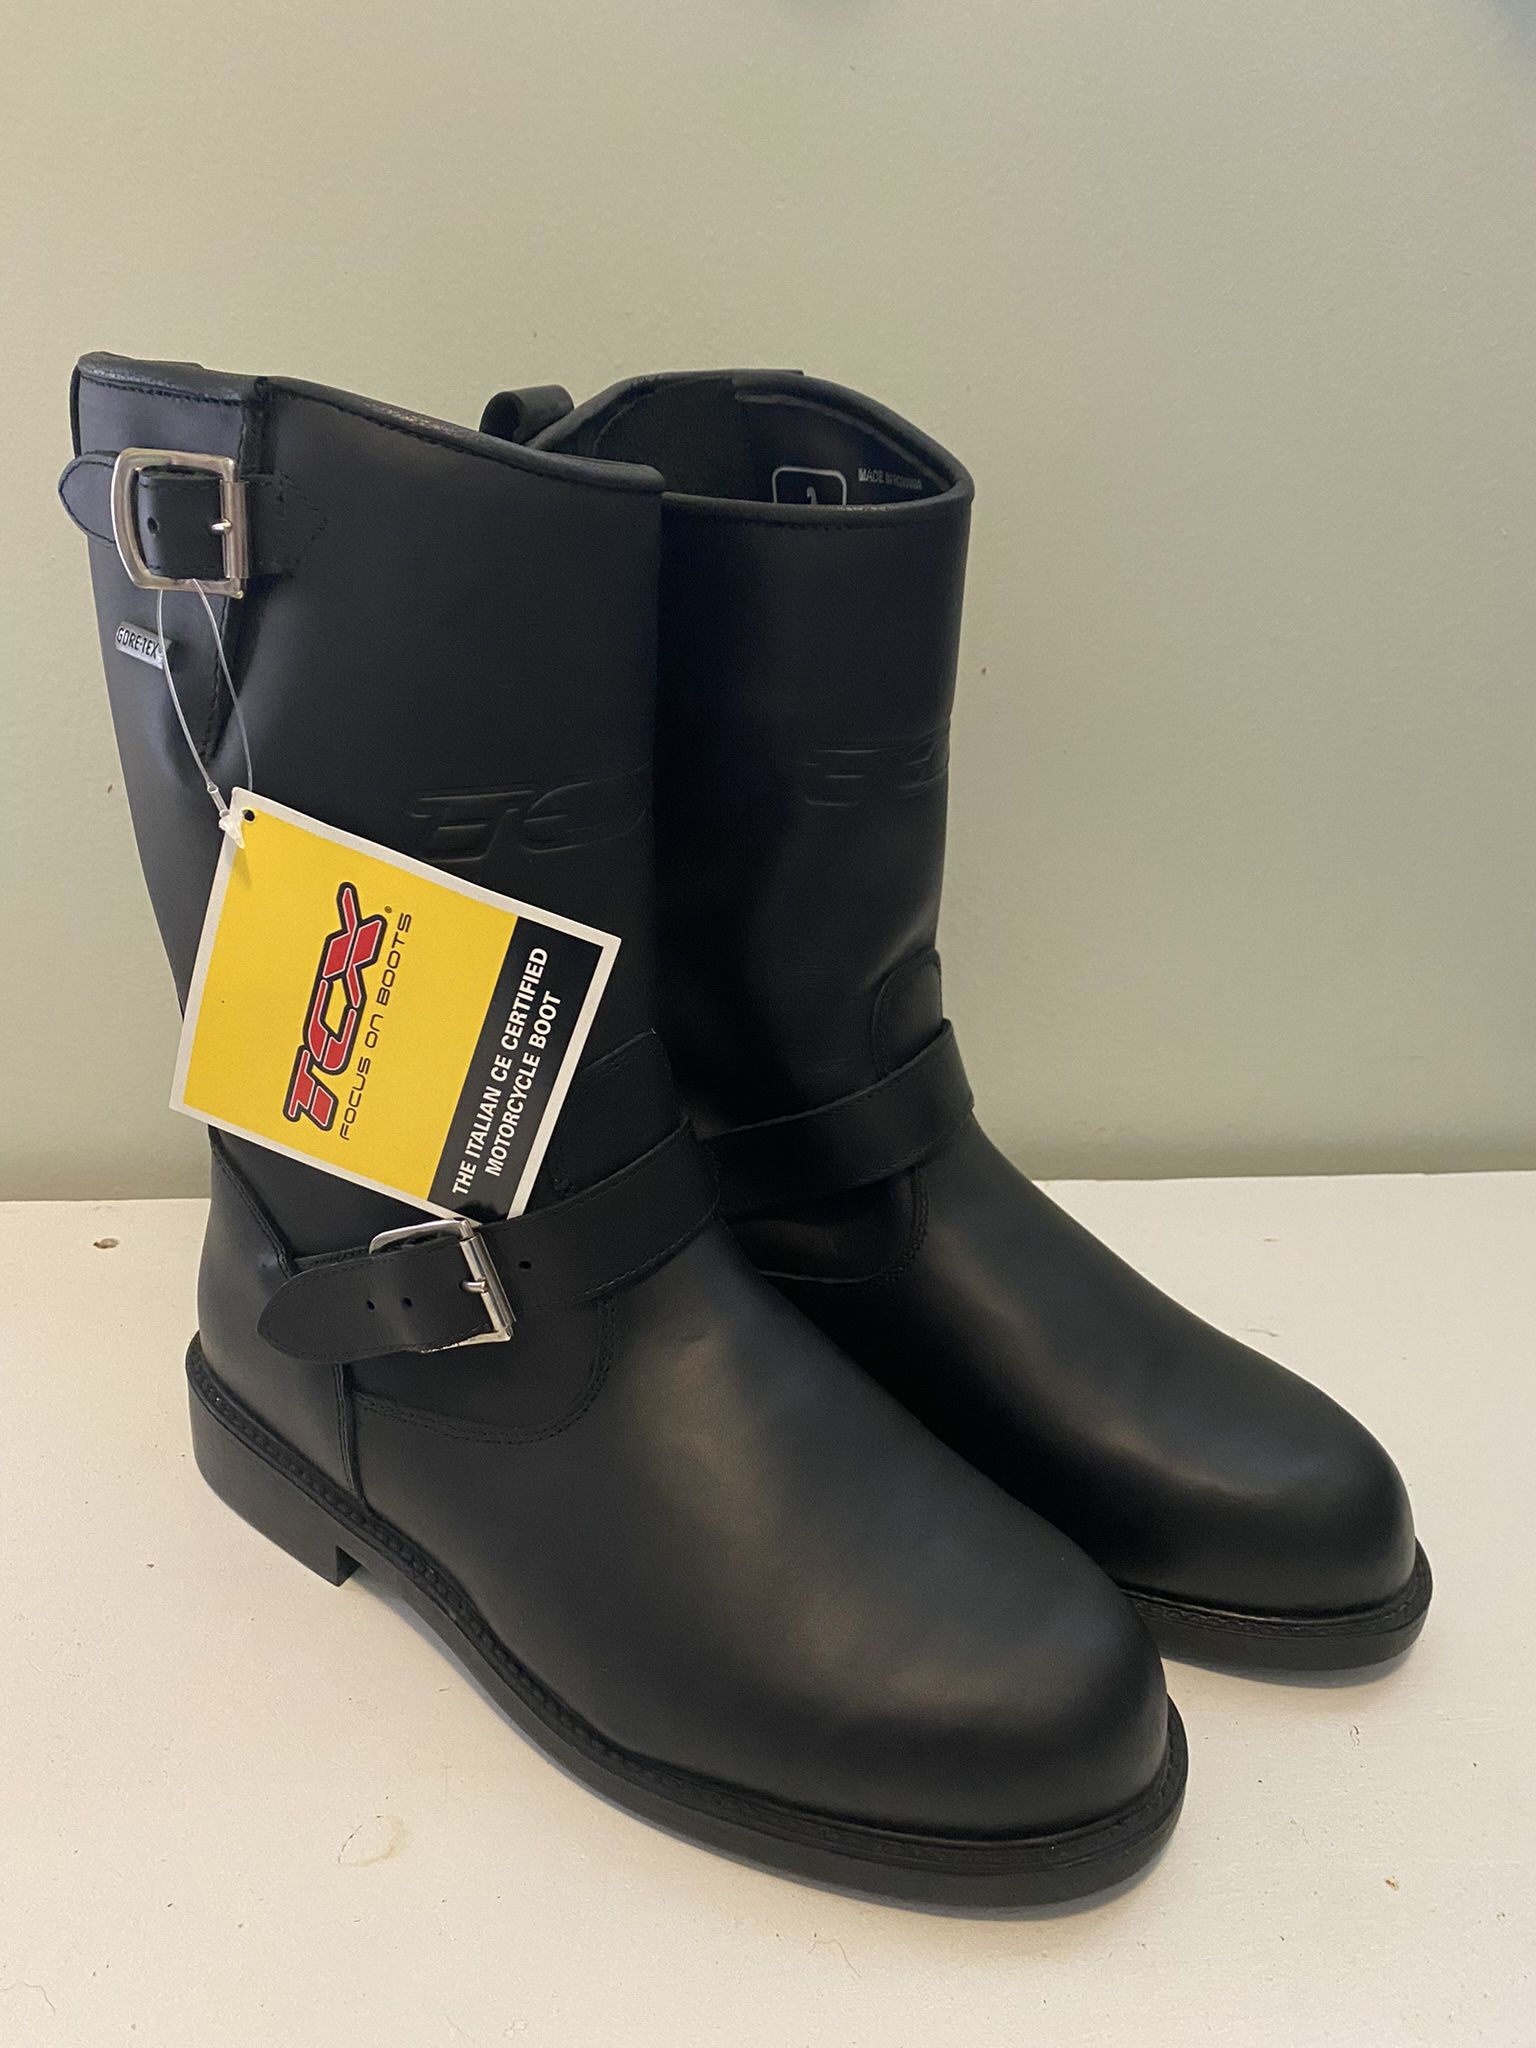 TCX Leather Motorcycle Boots Size EU45 / US11